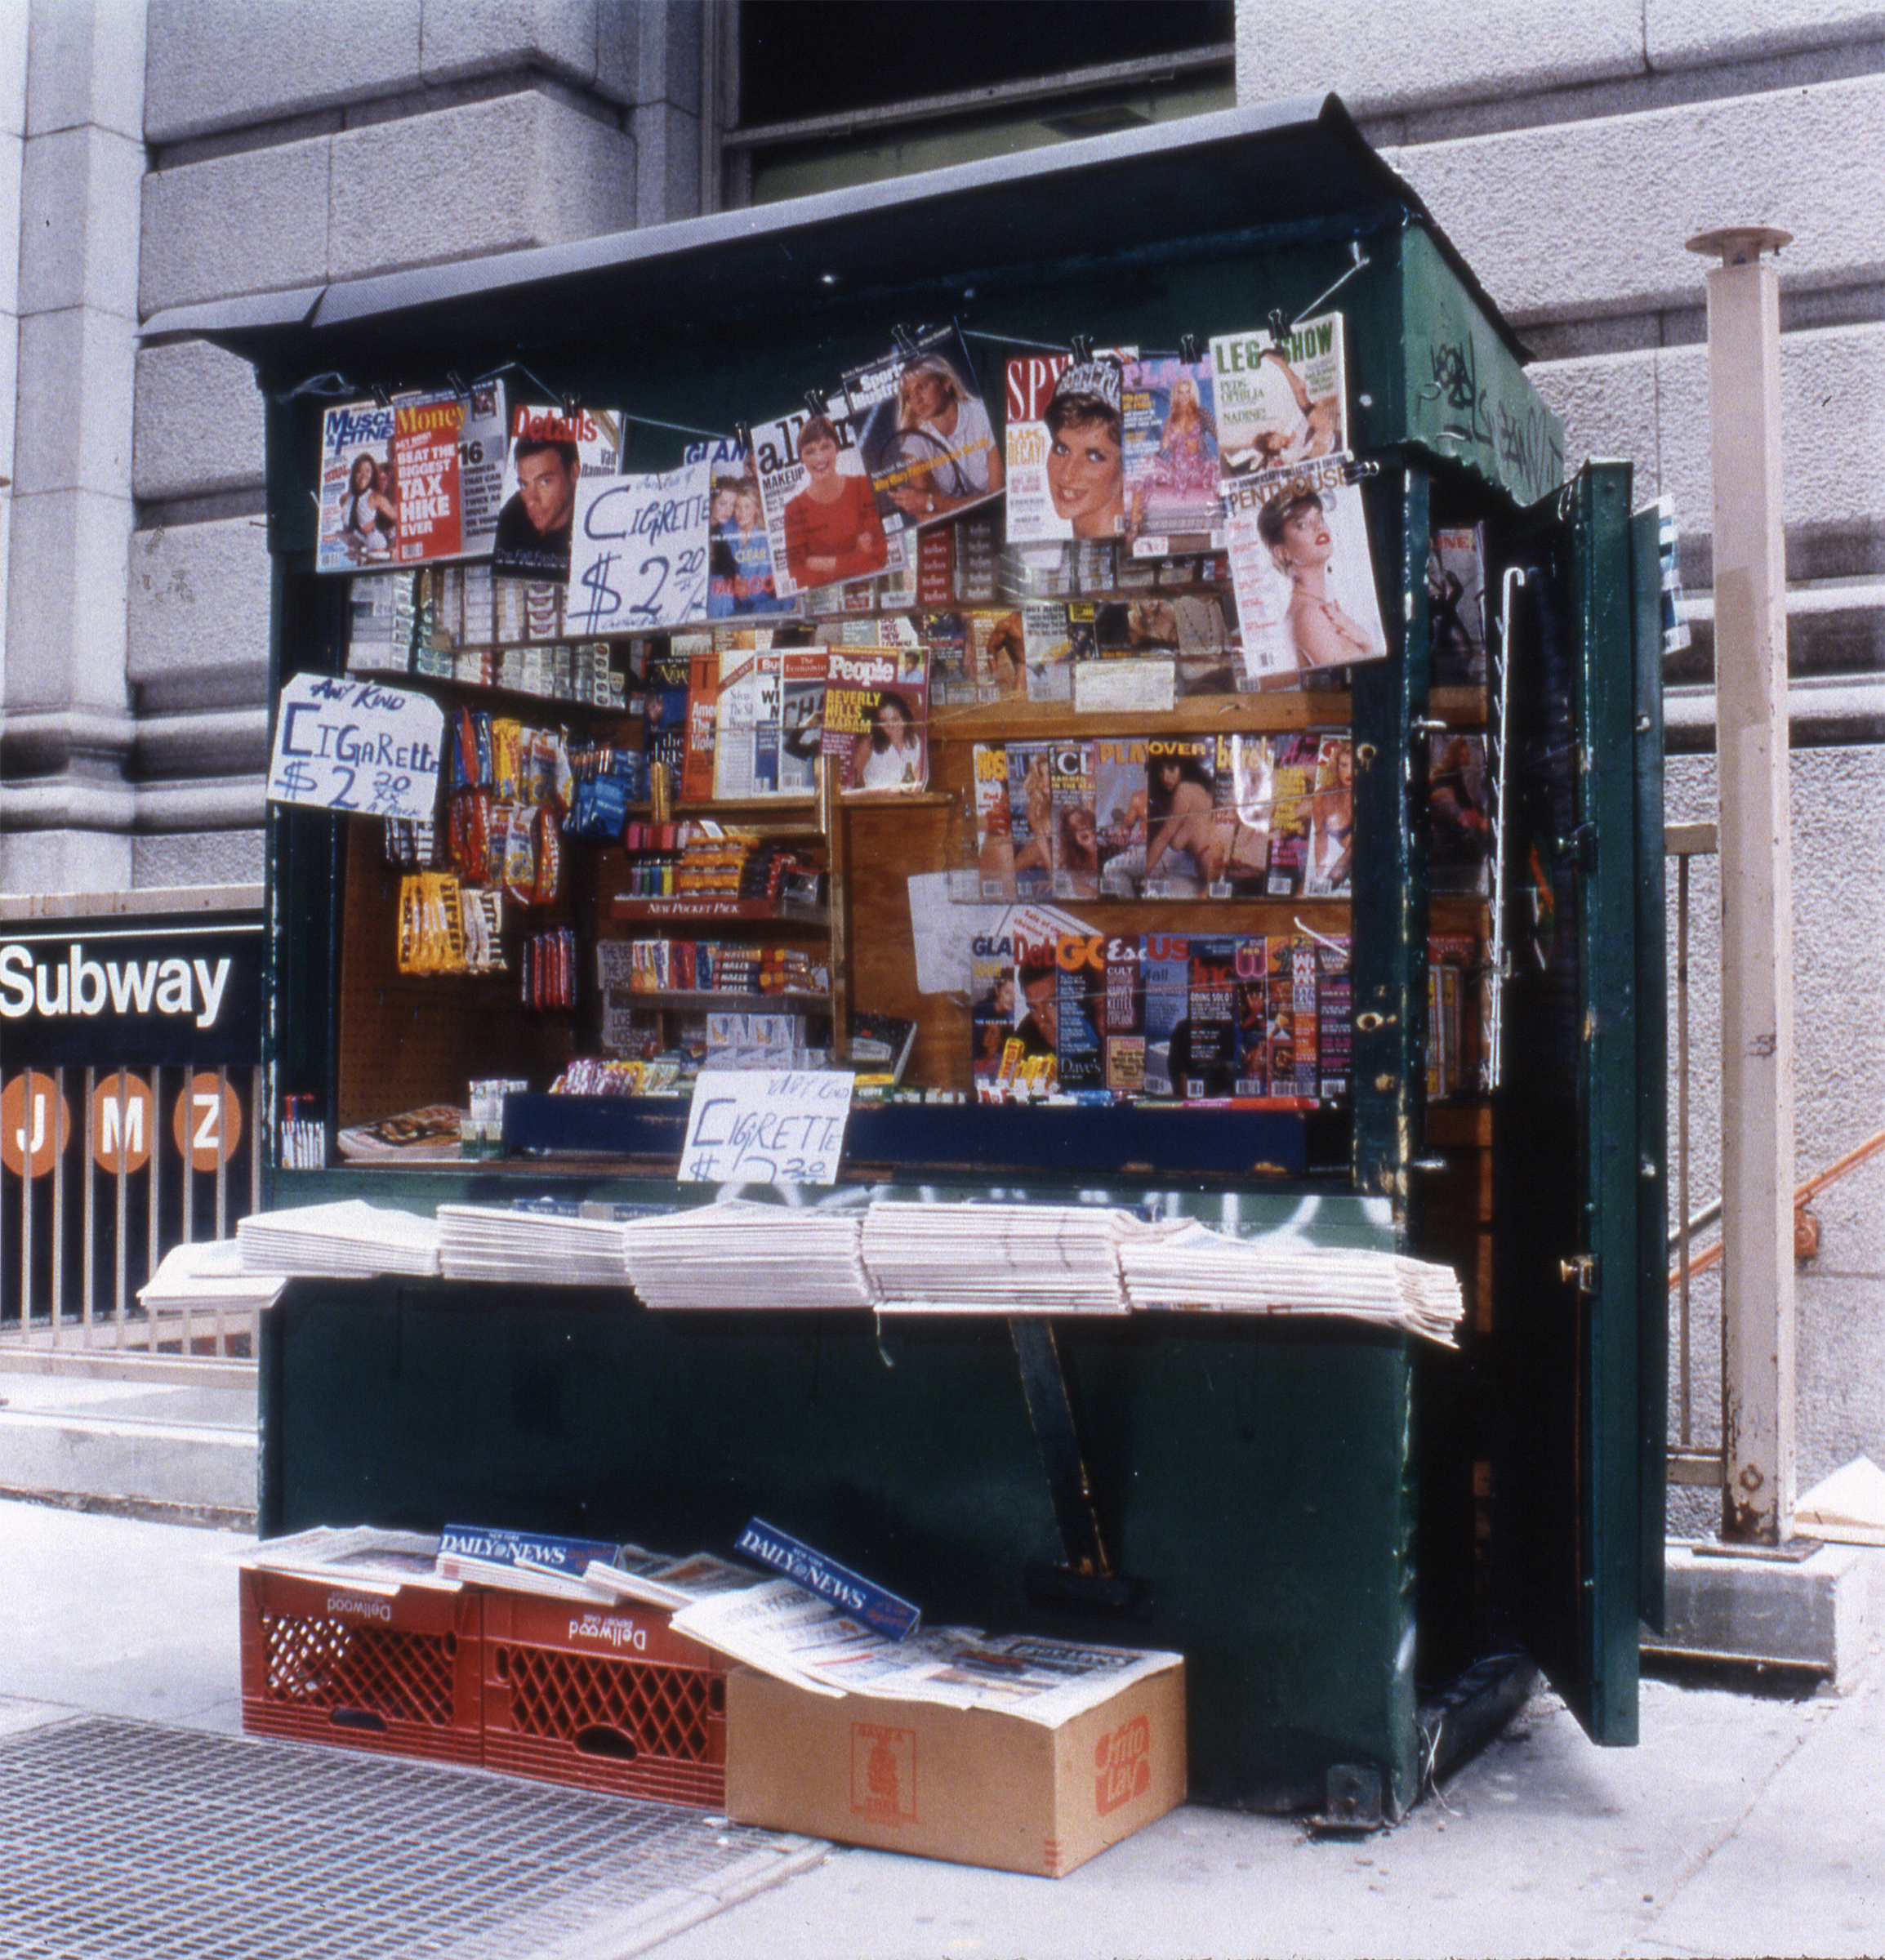     Moyra Davey, Newsstand No.9, 1994. Courtesy the artist; Galerie Buchholz, Berlin/Cologne/New York; and greengrassi, London.

